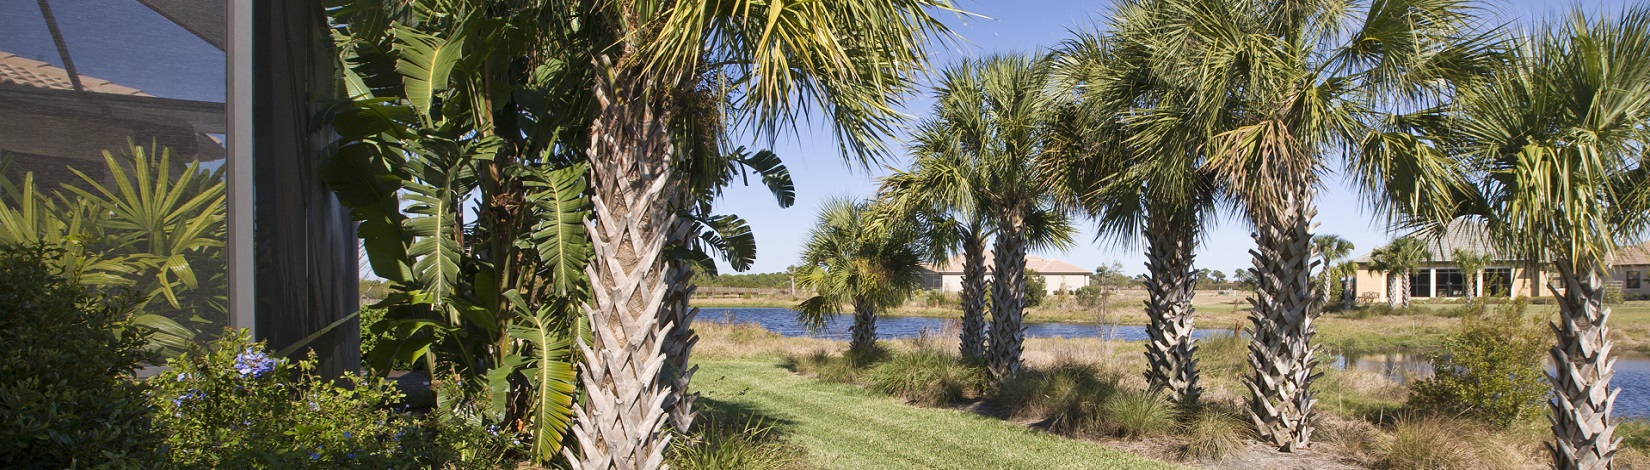 Back yard of Florida home with palm trees, lawn and canal